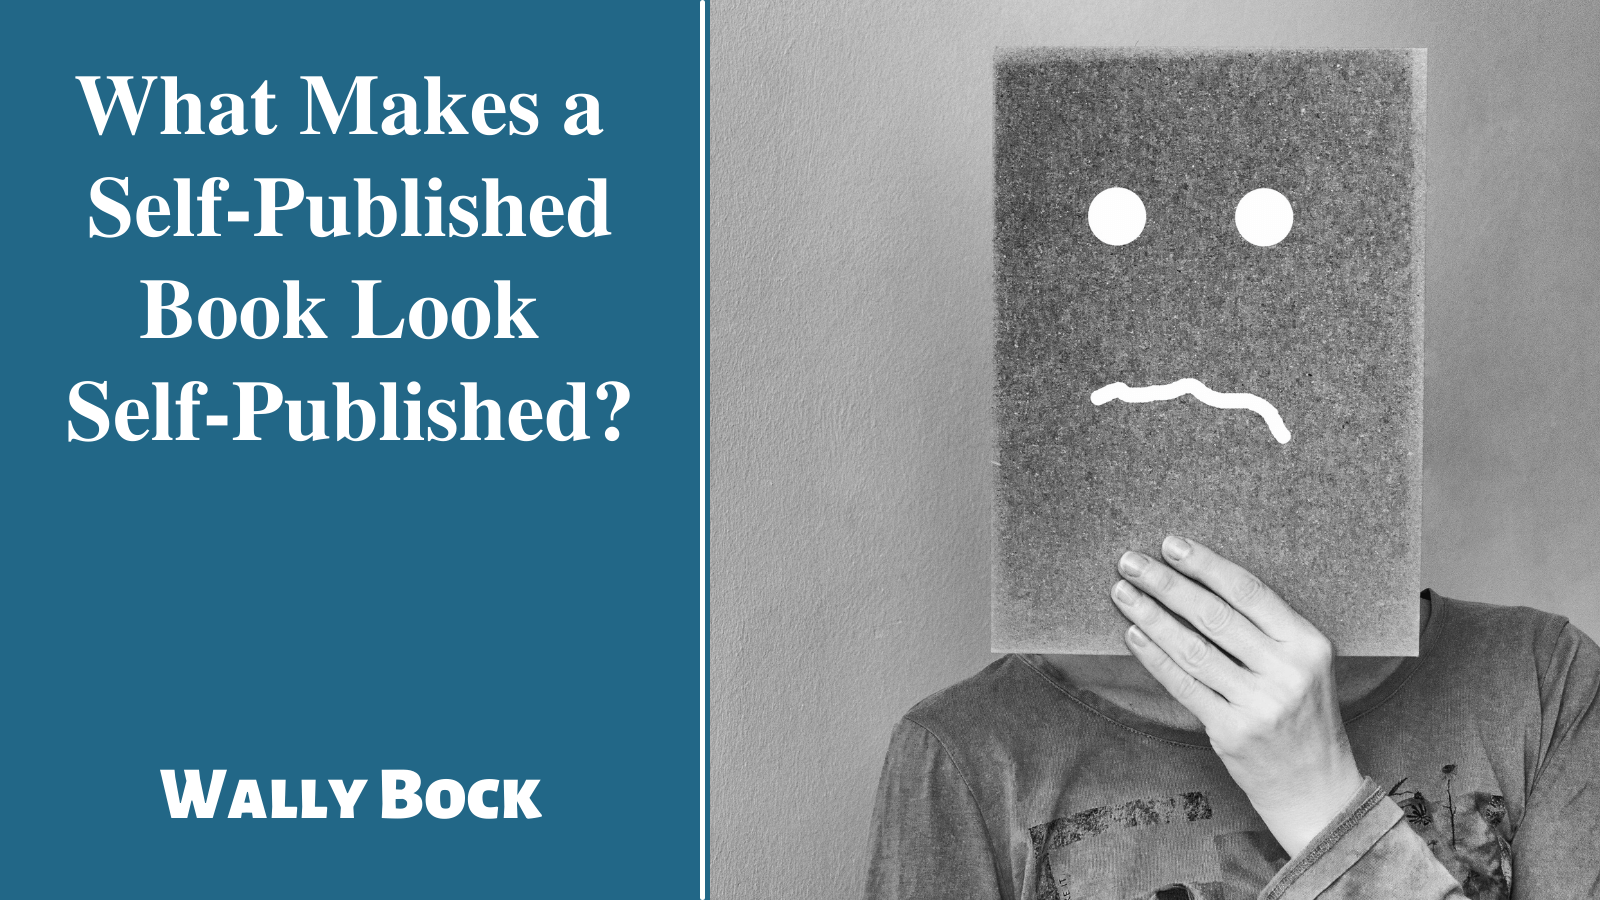 What makes a self-published book look self-published?